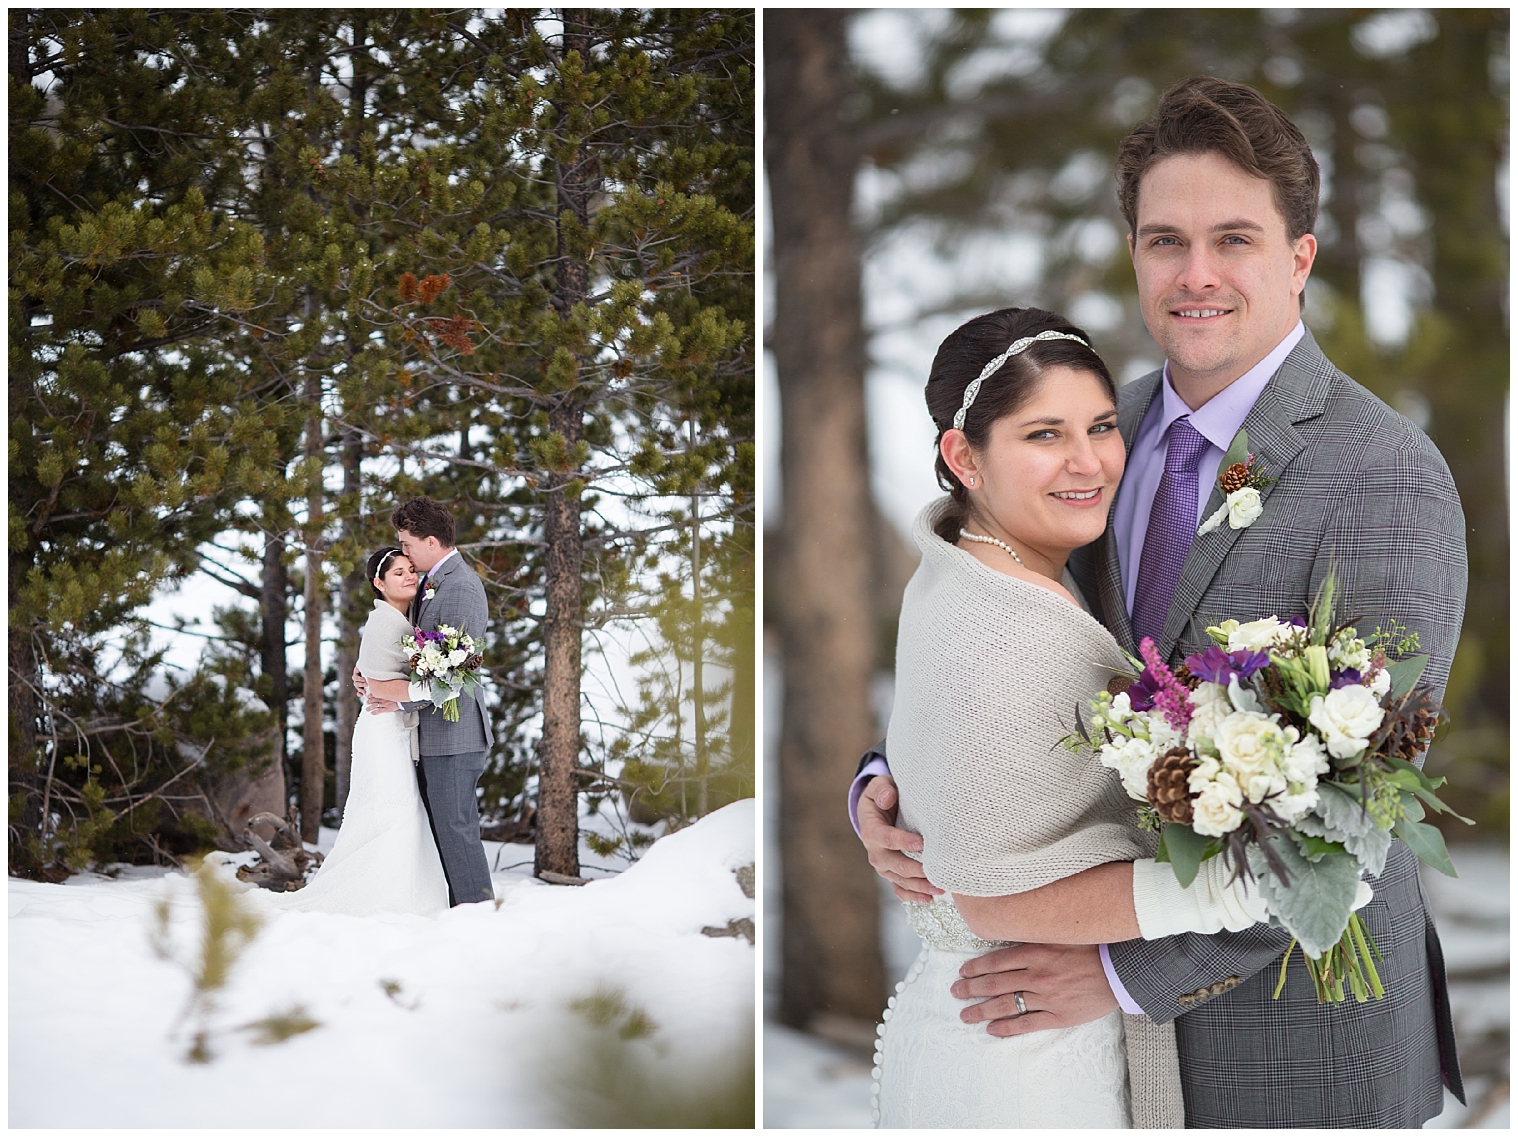 The bride and groom embrace during portraits at their Breckenridge elopement.